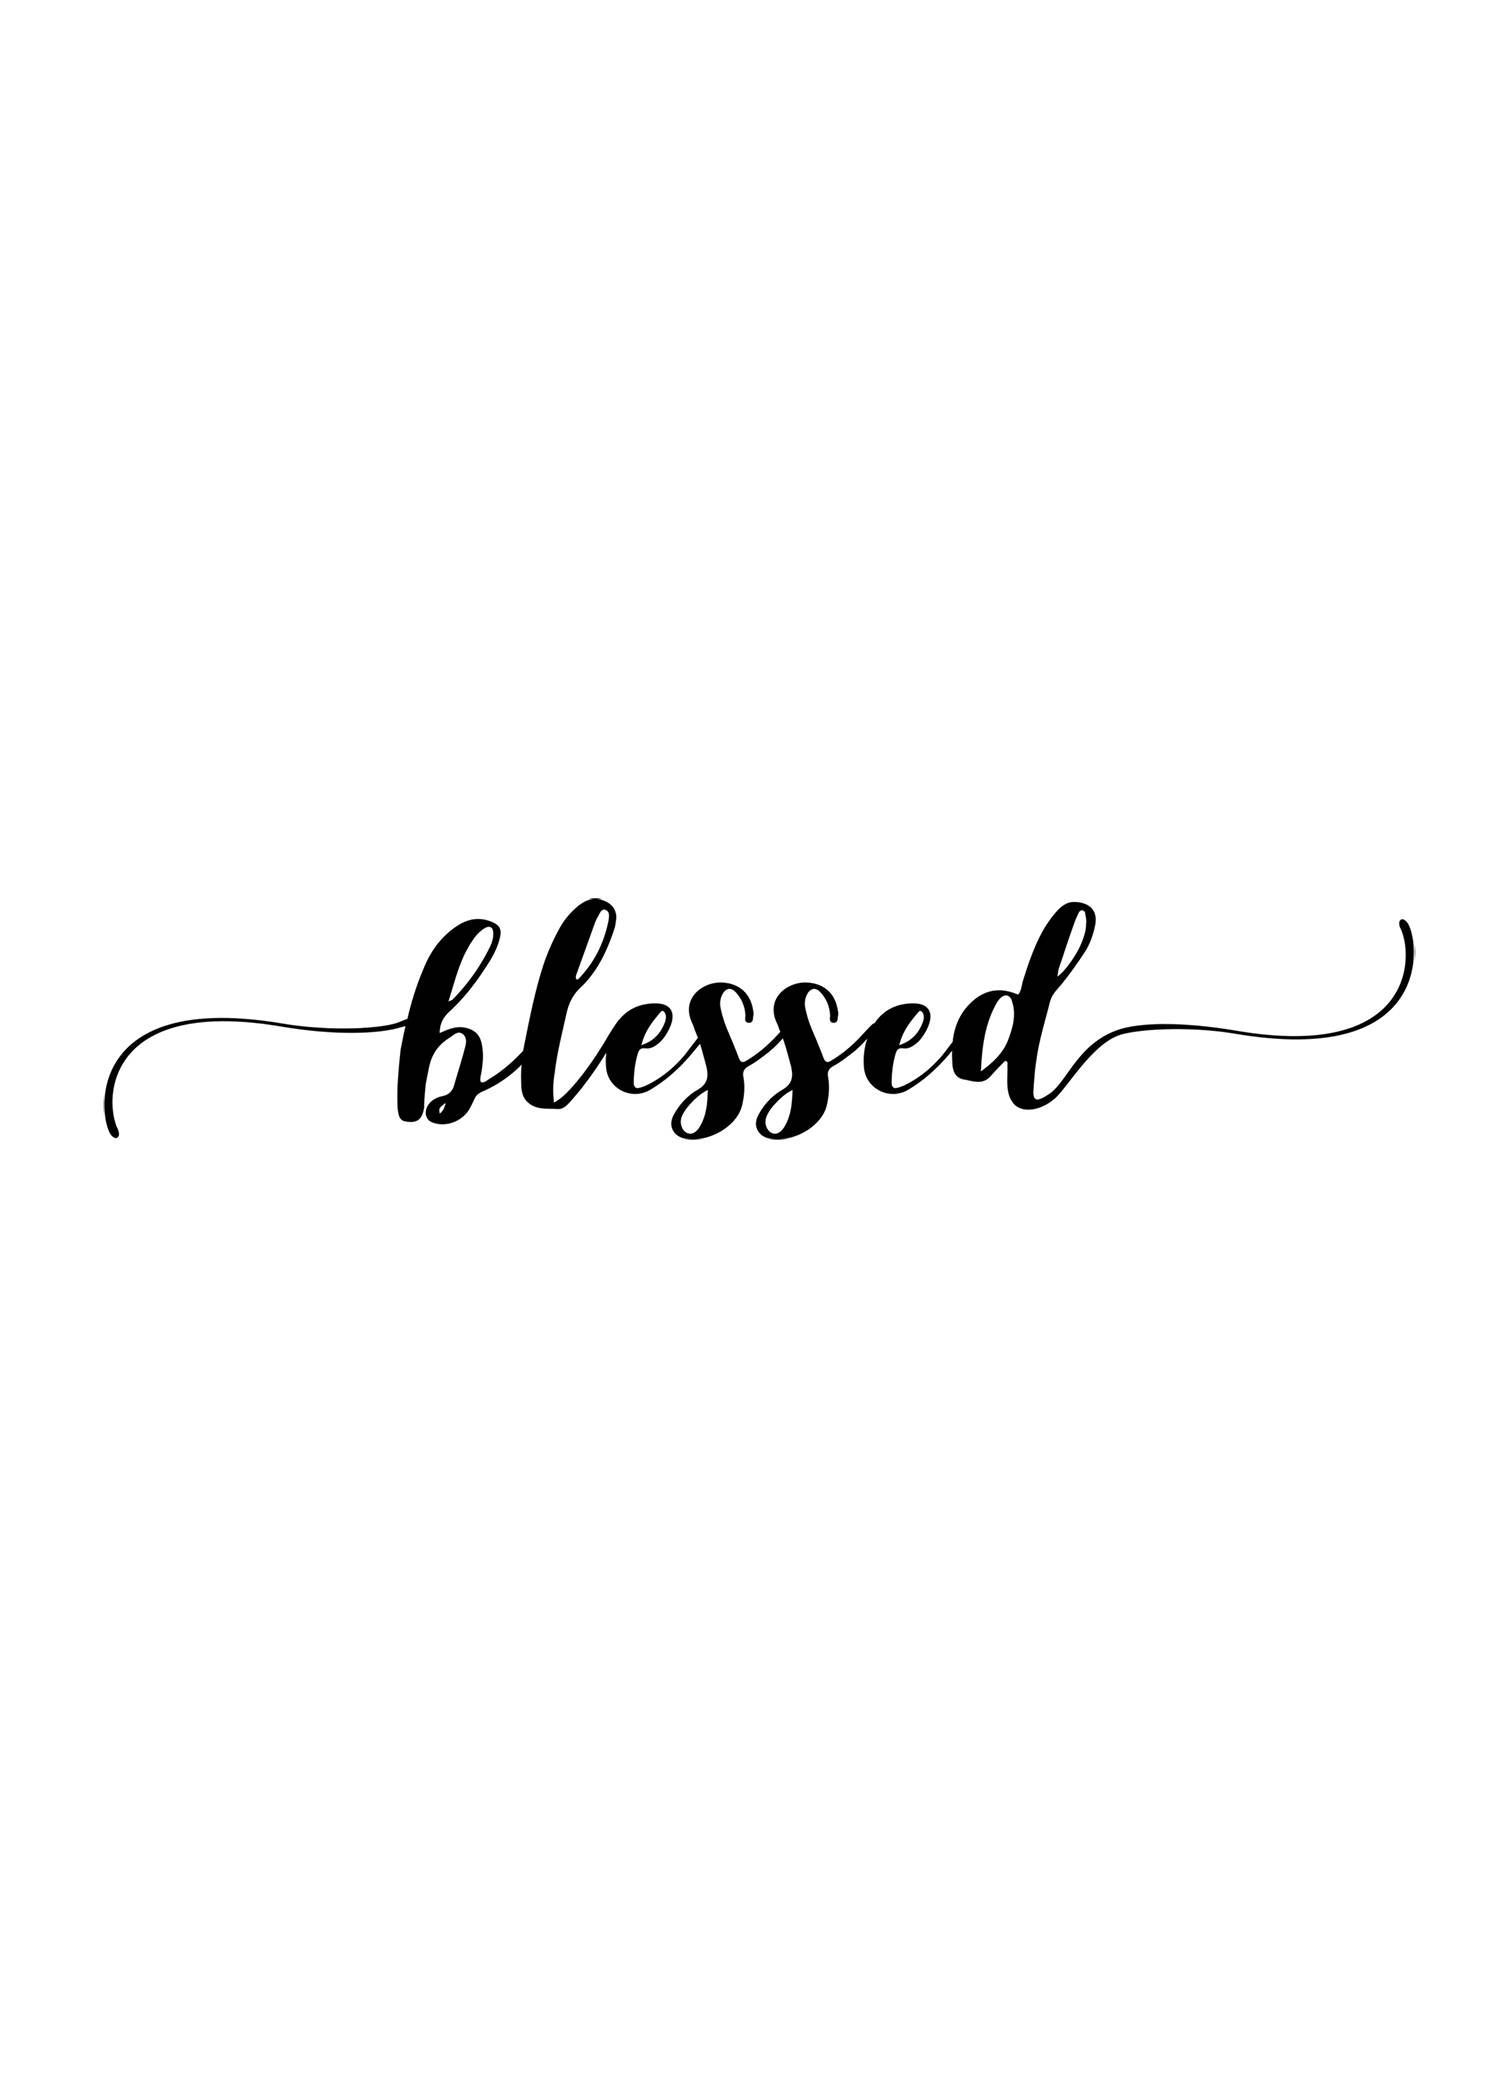 Blessed Digital Print, Instant Download, Inspirational Quote